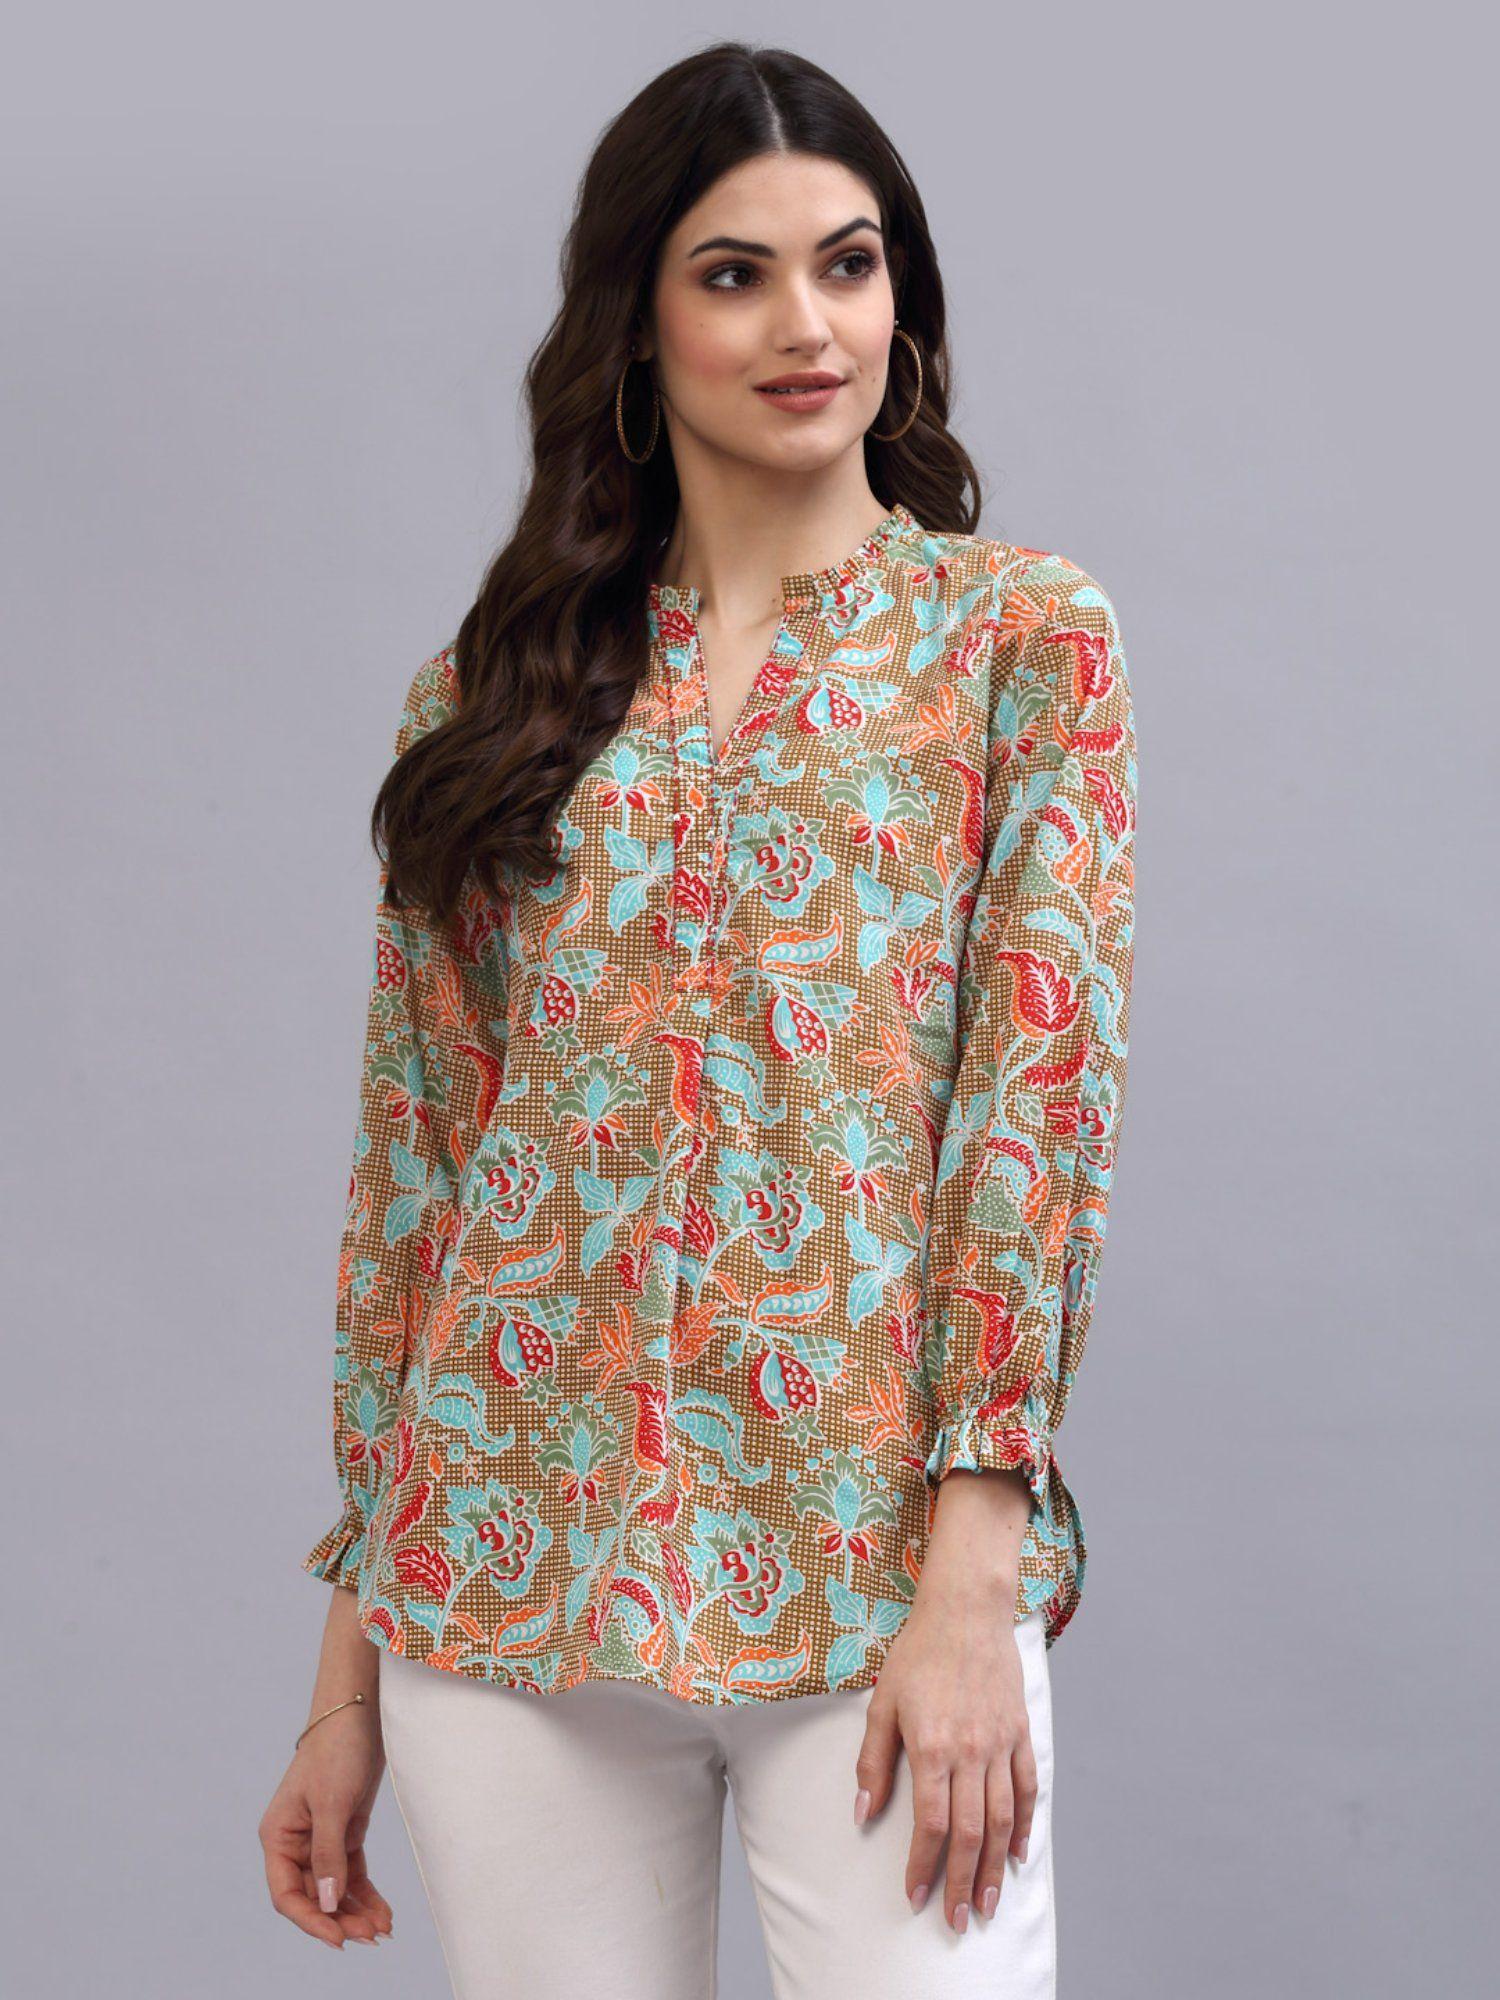 multi-color floral printed top with ruffles